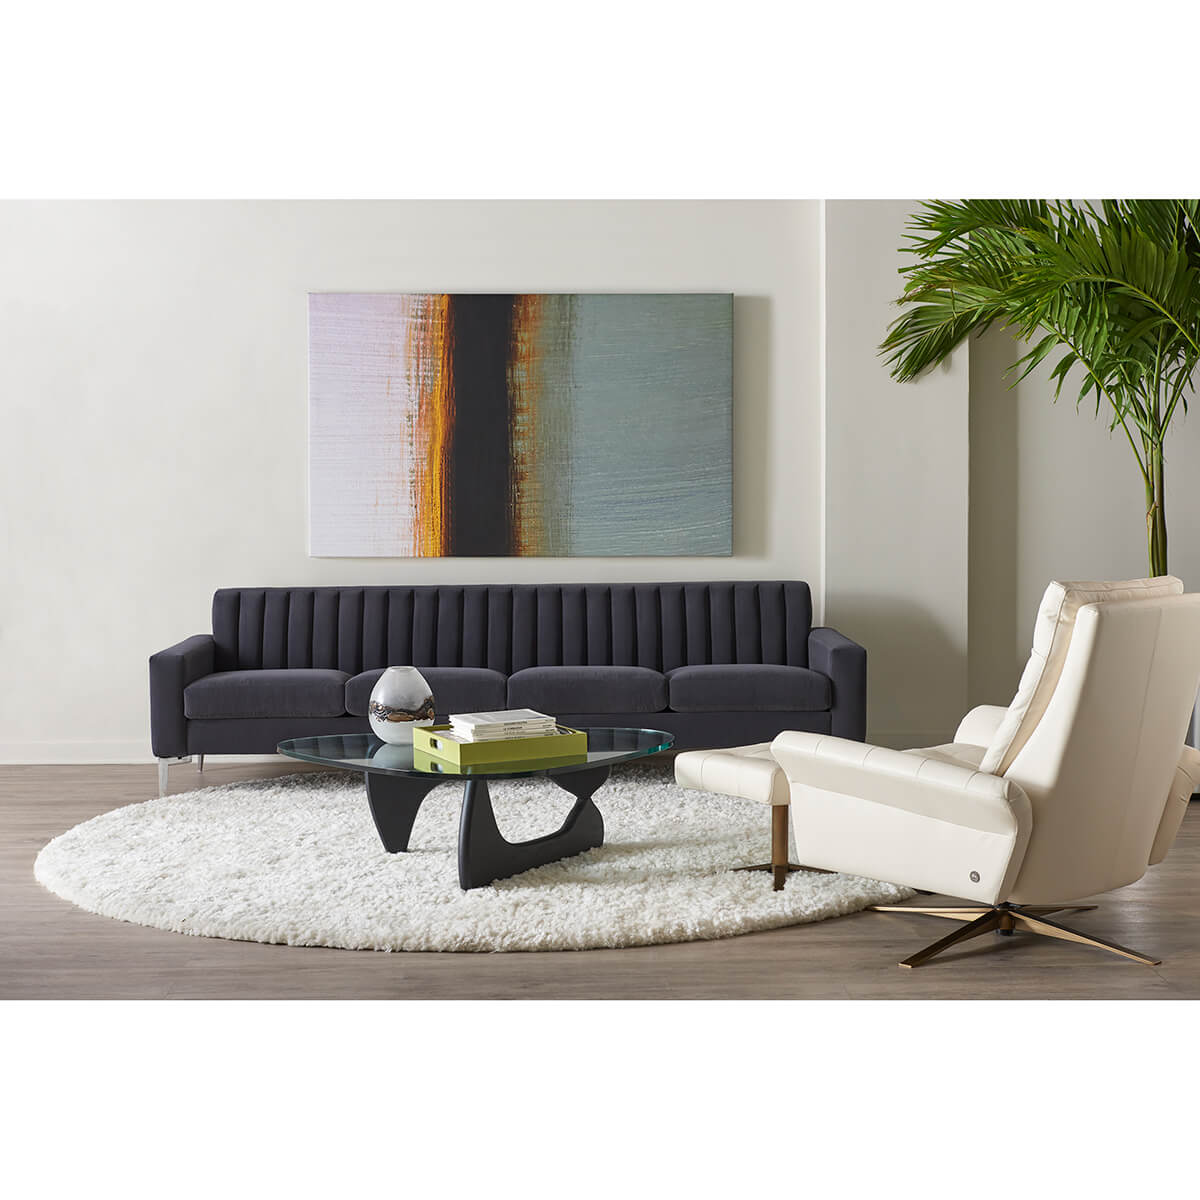 Read more about the article Rayna/Pileus Living Room Collection